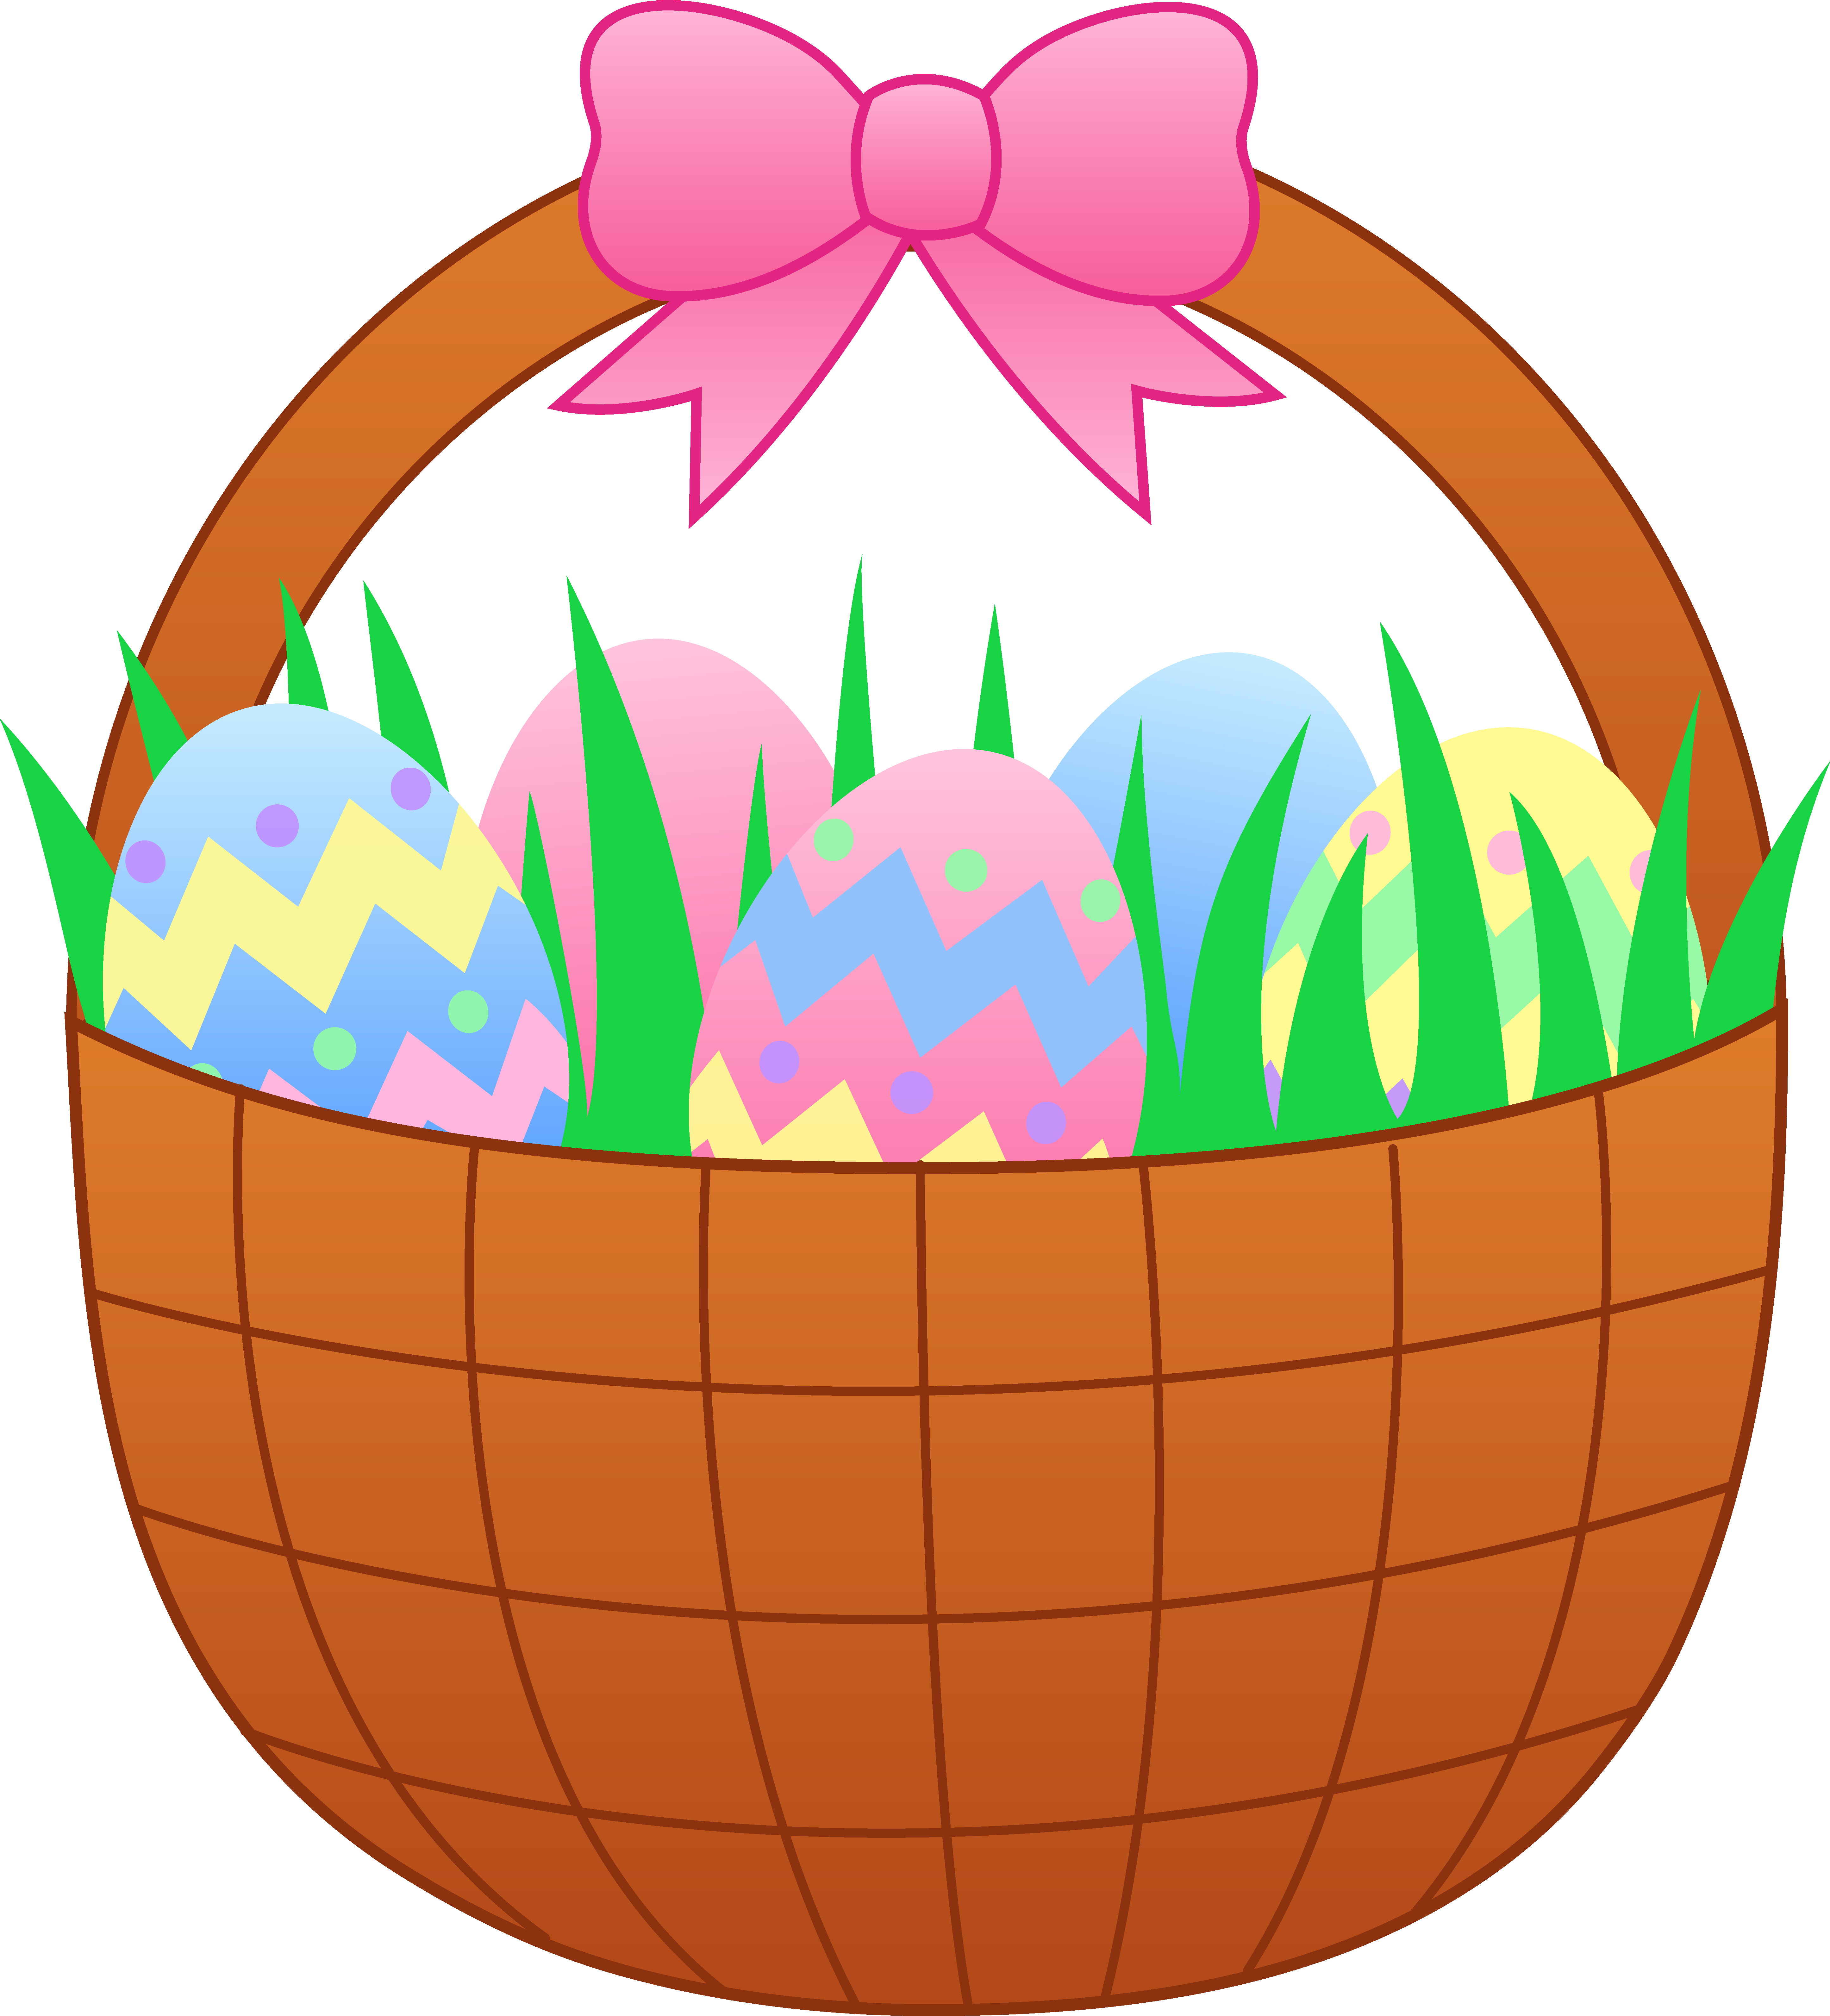 Easter baskets images clipart